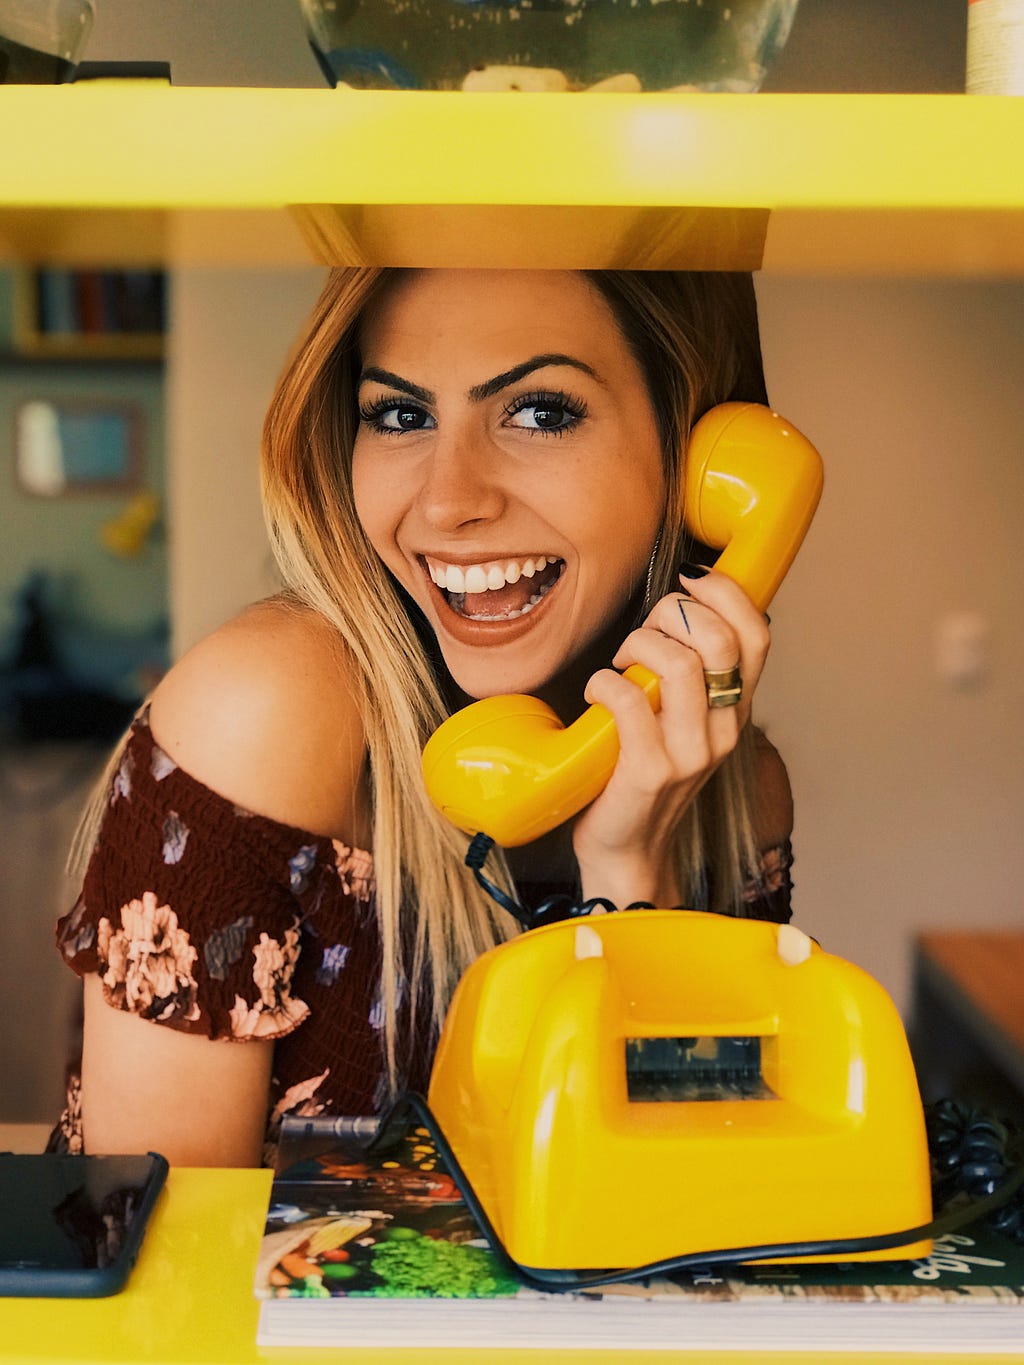 A person on the telephone, holding the receiver to their ear and looking exaggeratedly happy